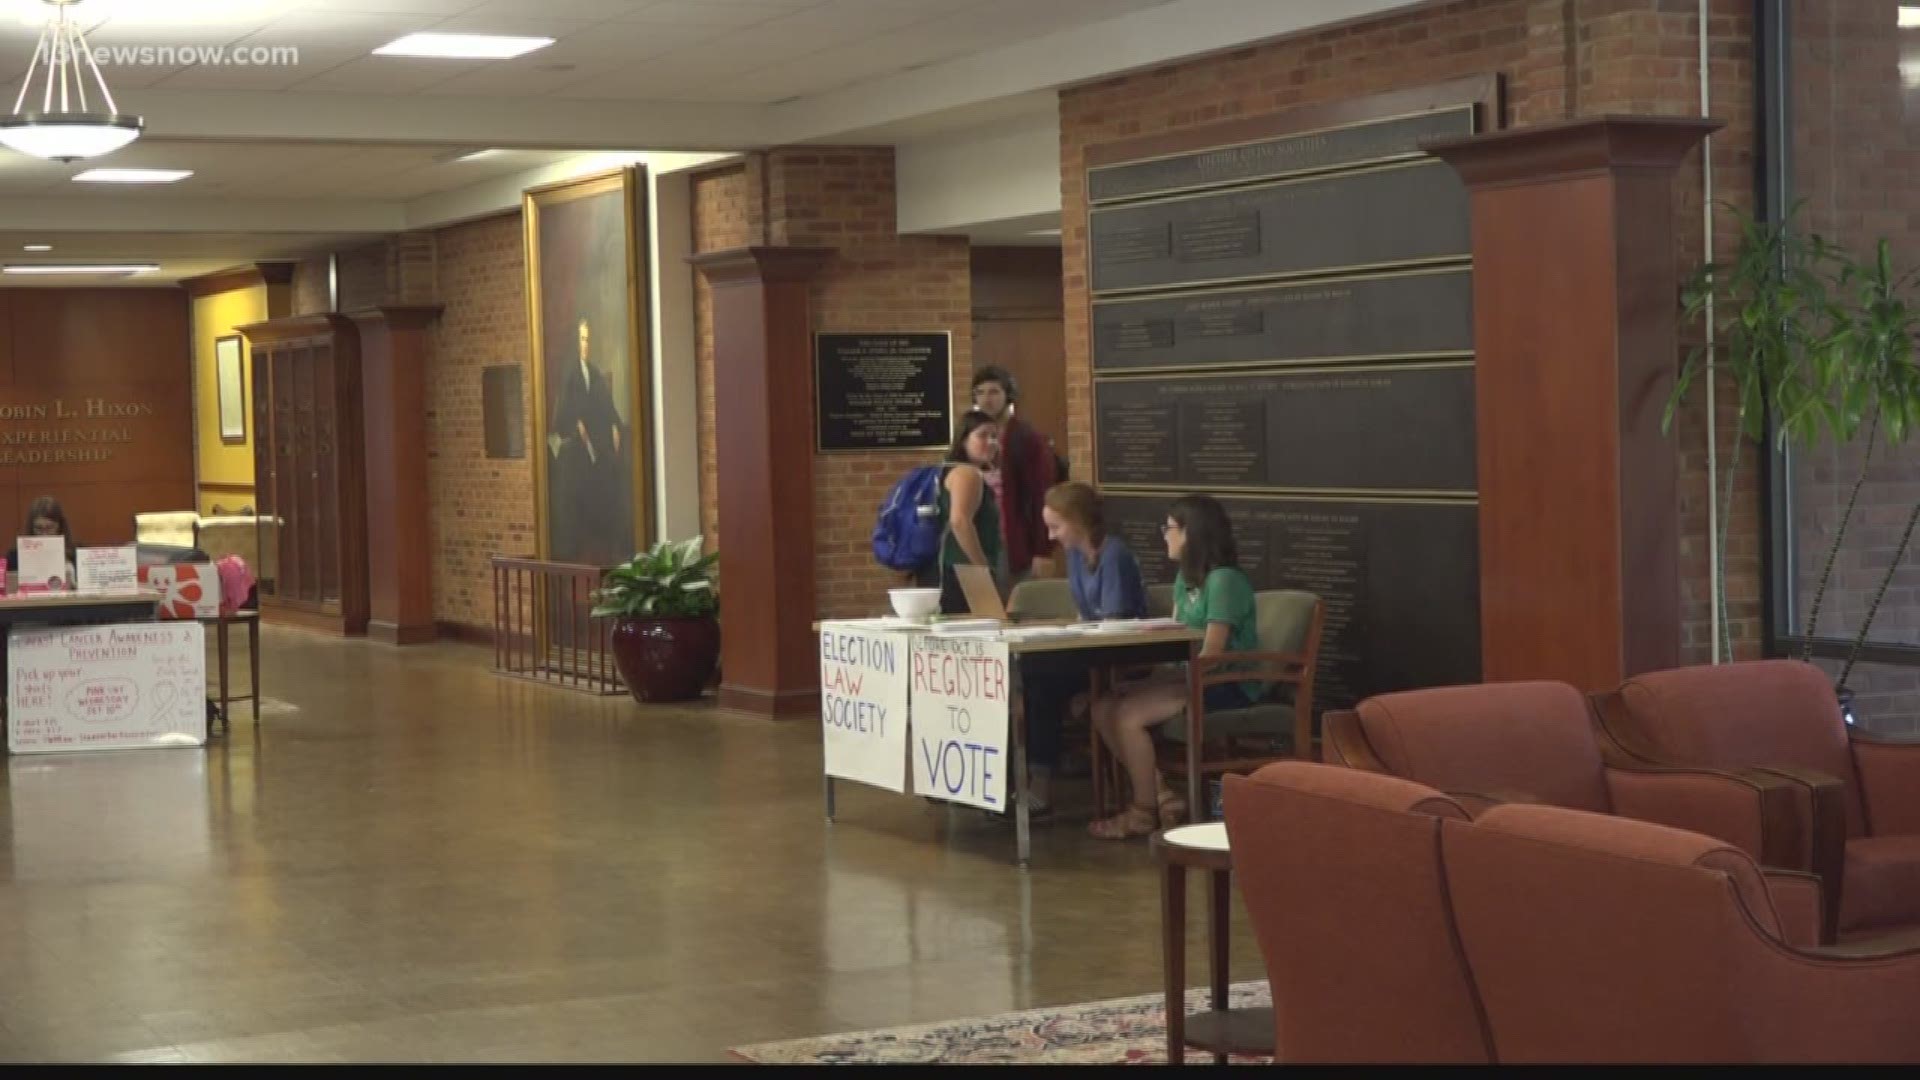 The College of William & Mary made a last-minute push to get people registered to vote in November.